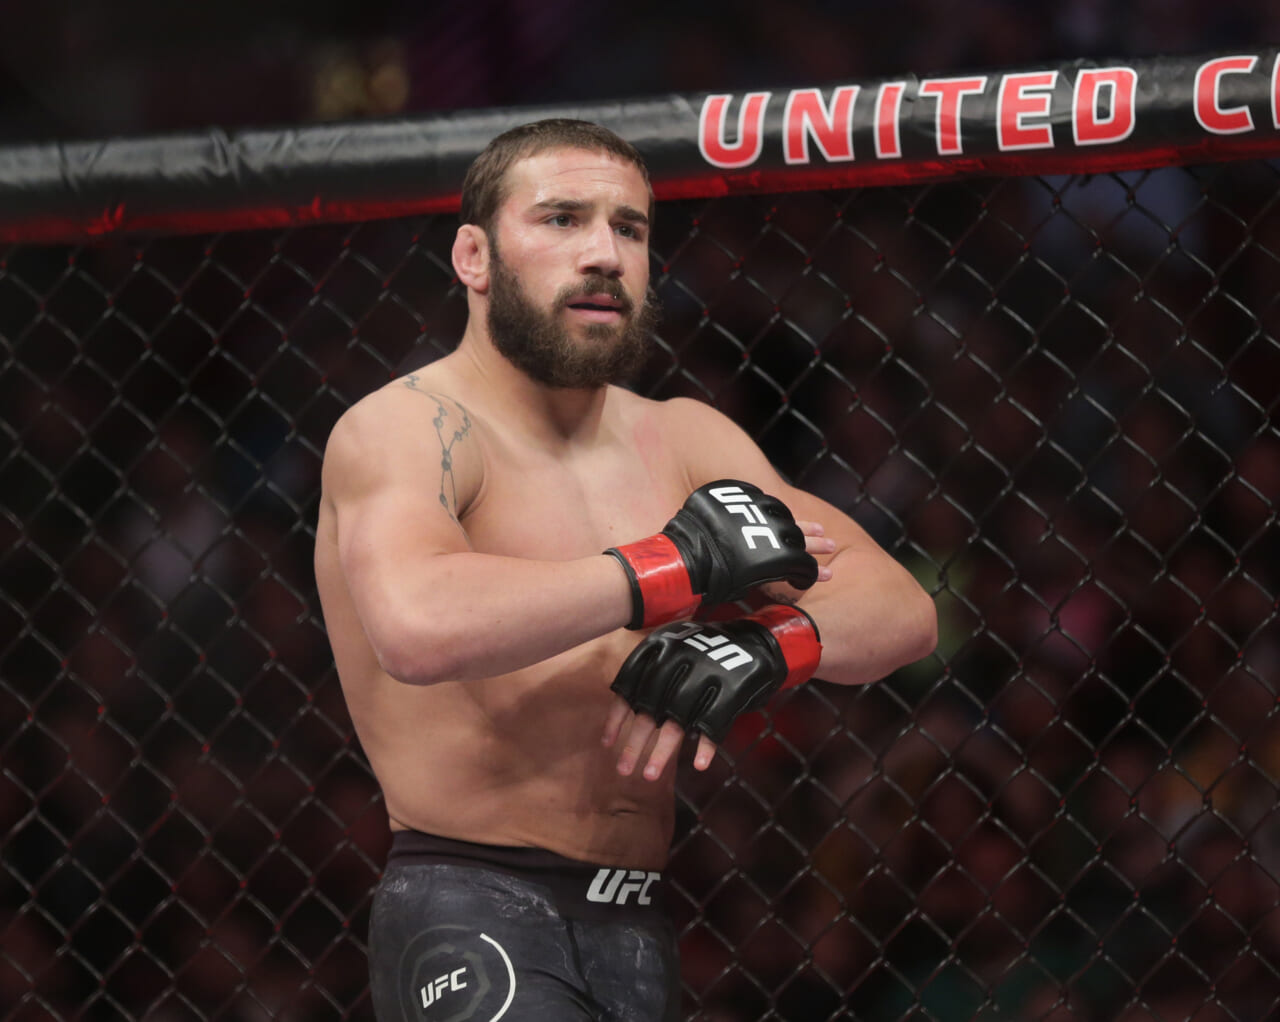 After coming up short at UFC Vegas 20, what’s next for Jimmie Rivera?